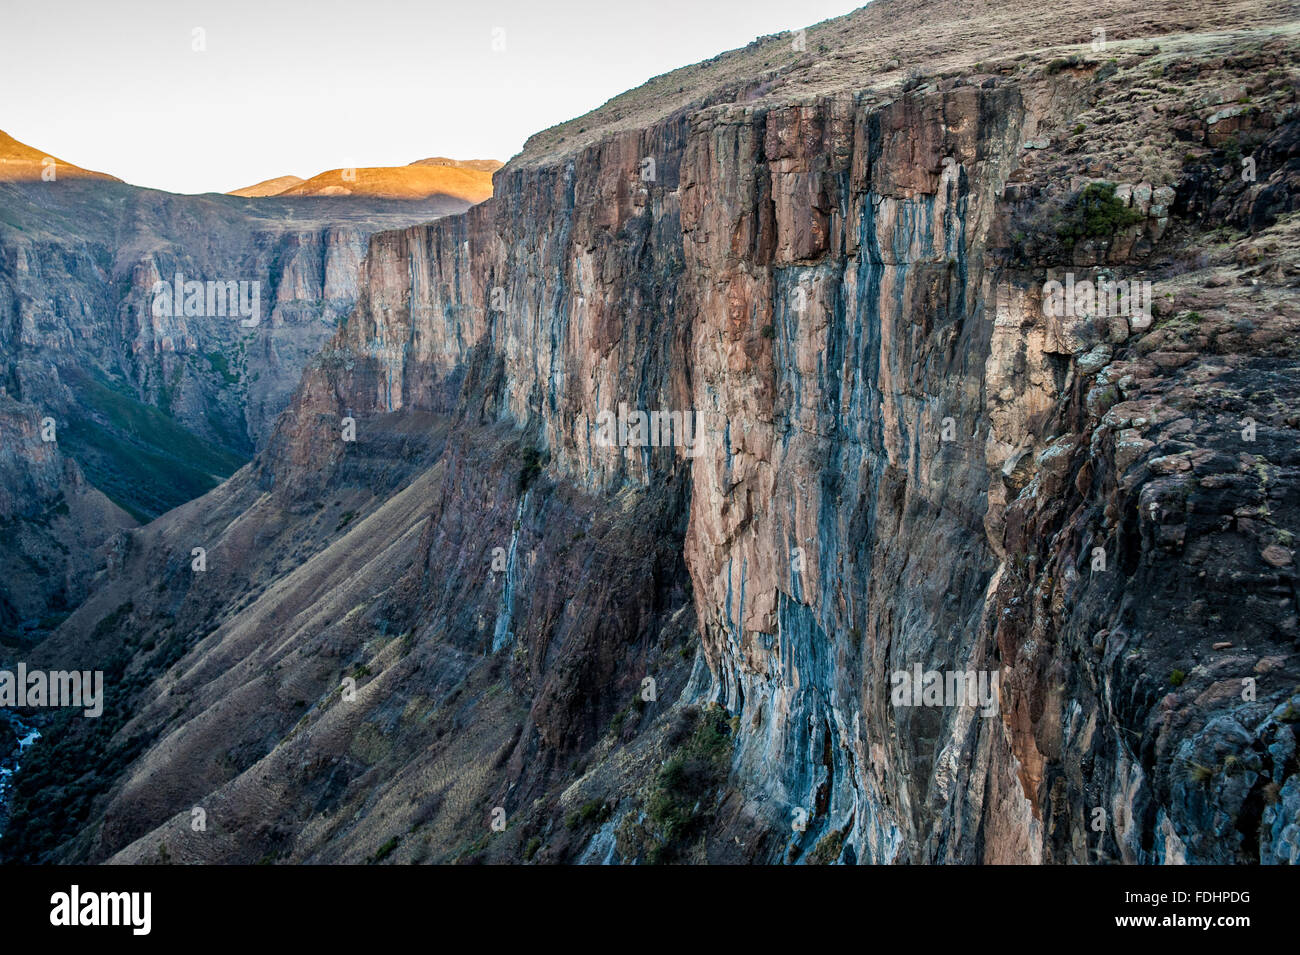 Canyon Cliff at Maletsunyane Falls in Semonkong, Lesotho, Africa Stock Photo